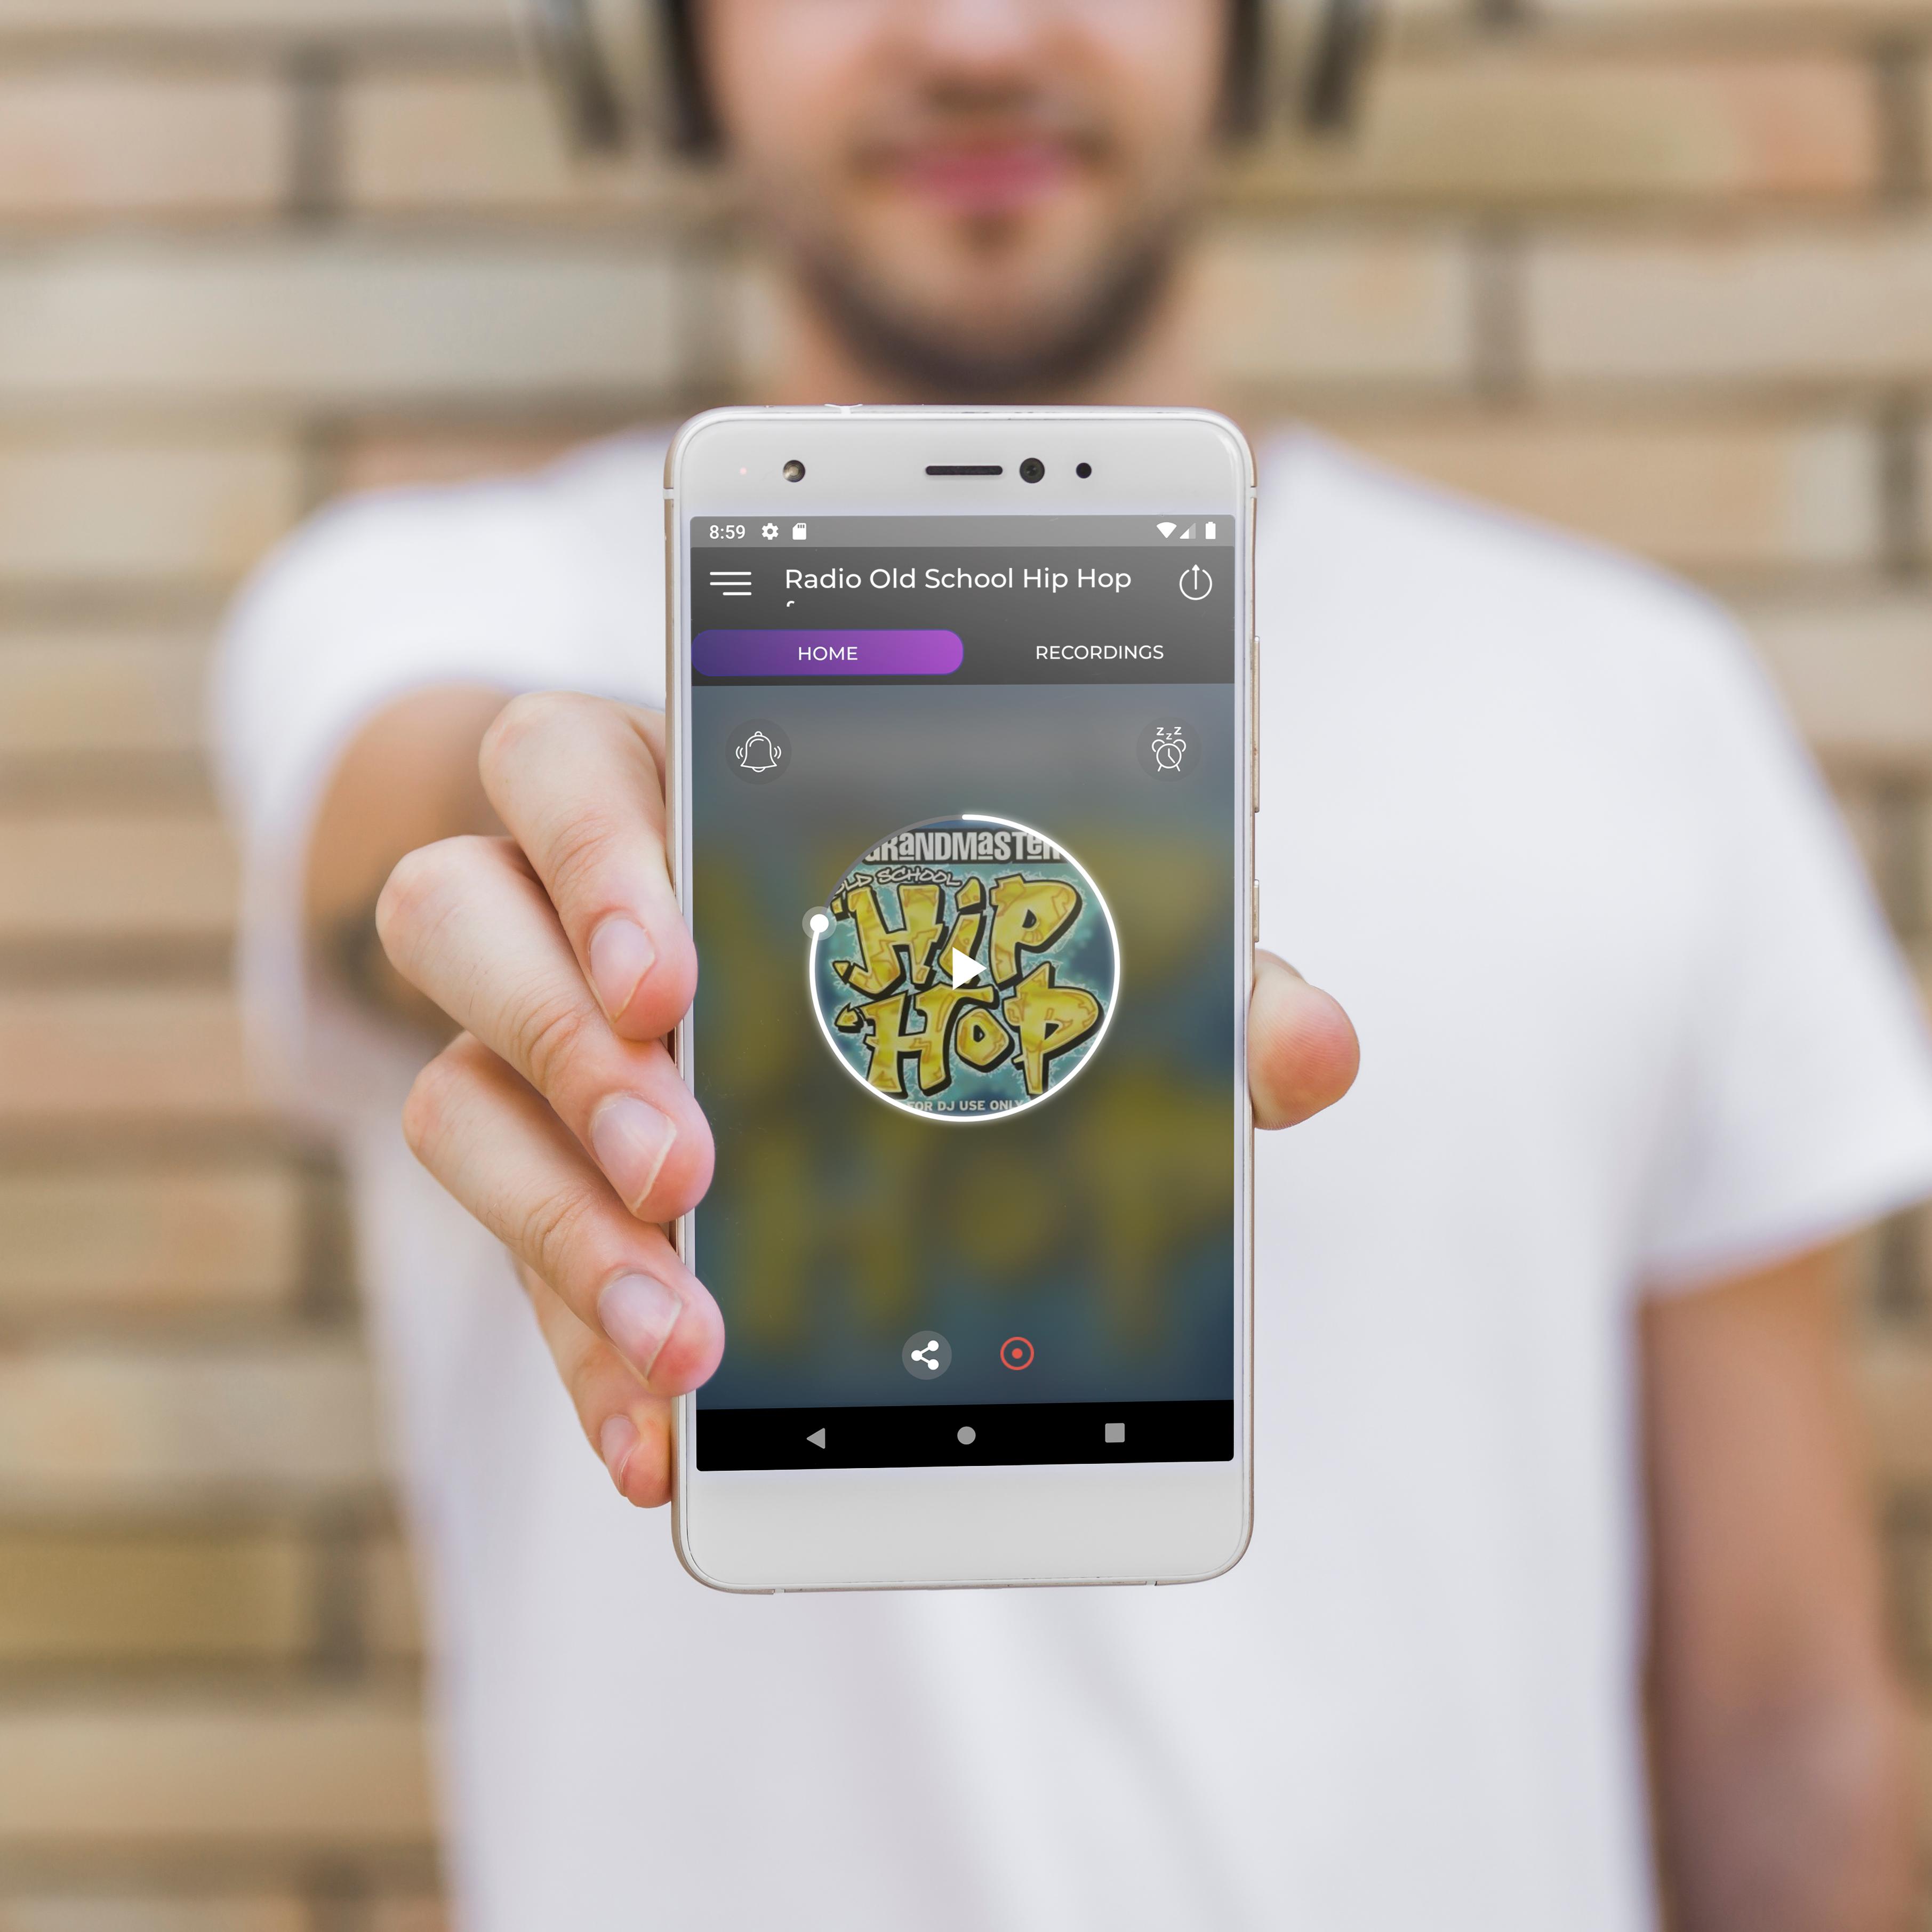 Radio Old School Hip Hop fm + App USA Free Online for Android - APK Download